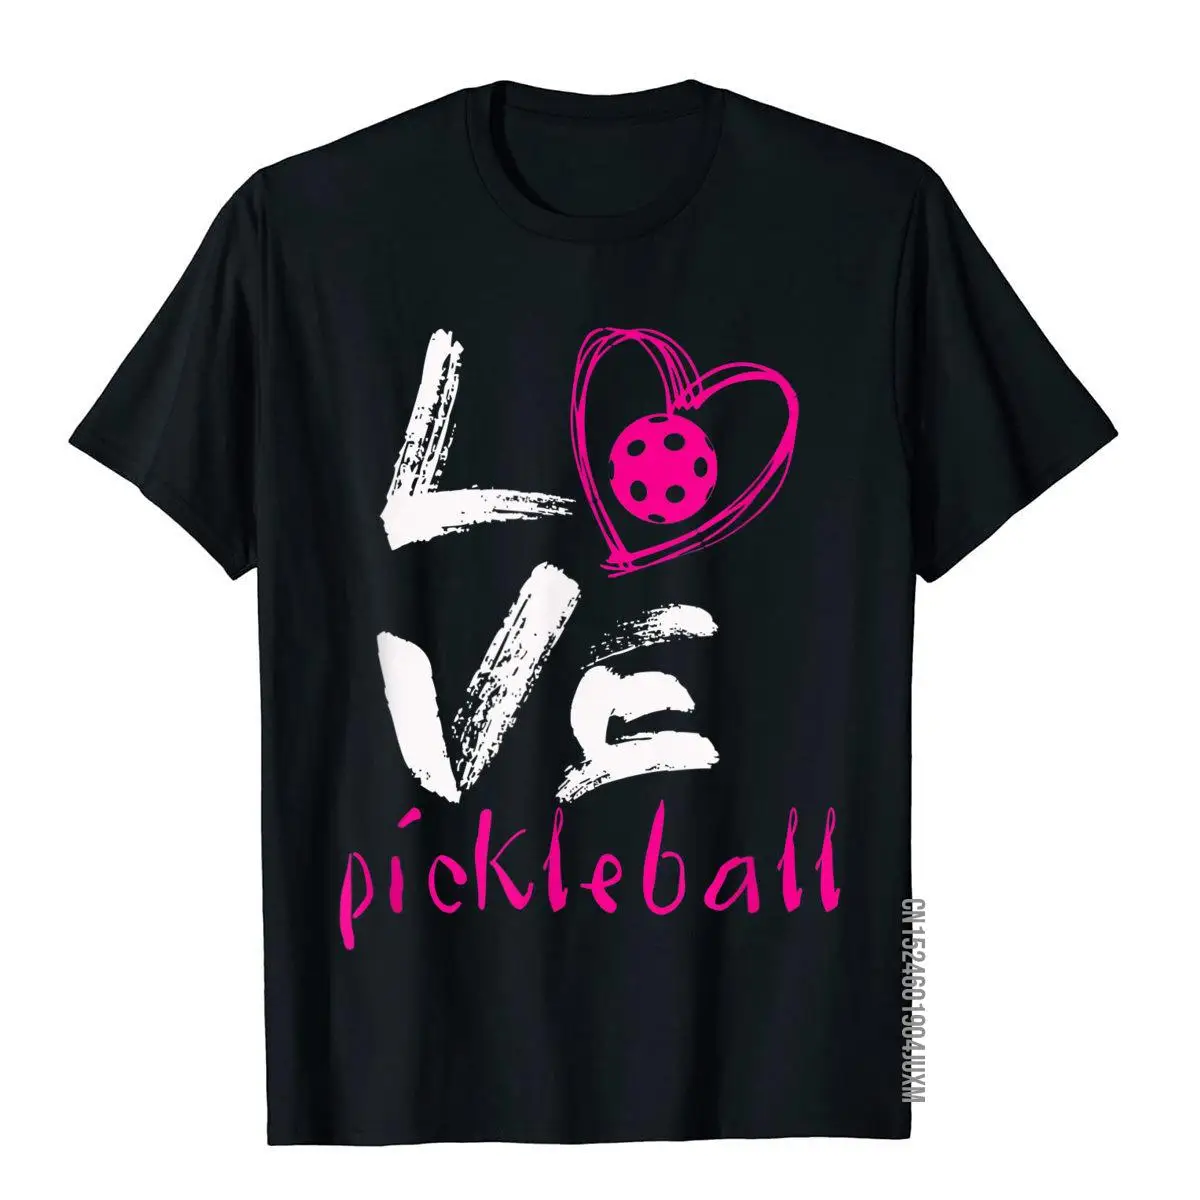 I Love Pickleball T-Shirt Funny Pickle Ball Tee for Player T-Shirt__97A3636black